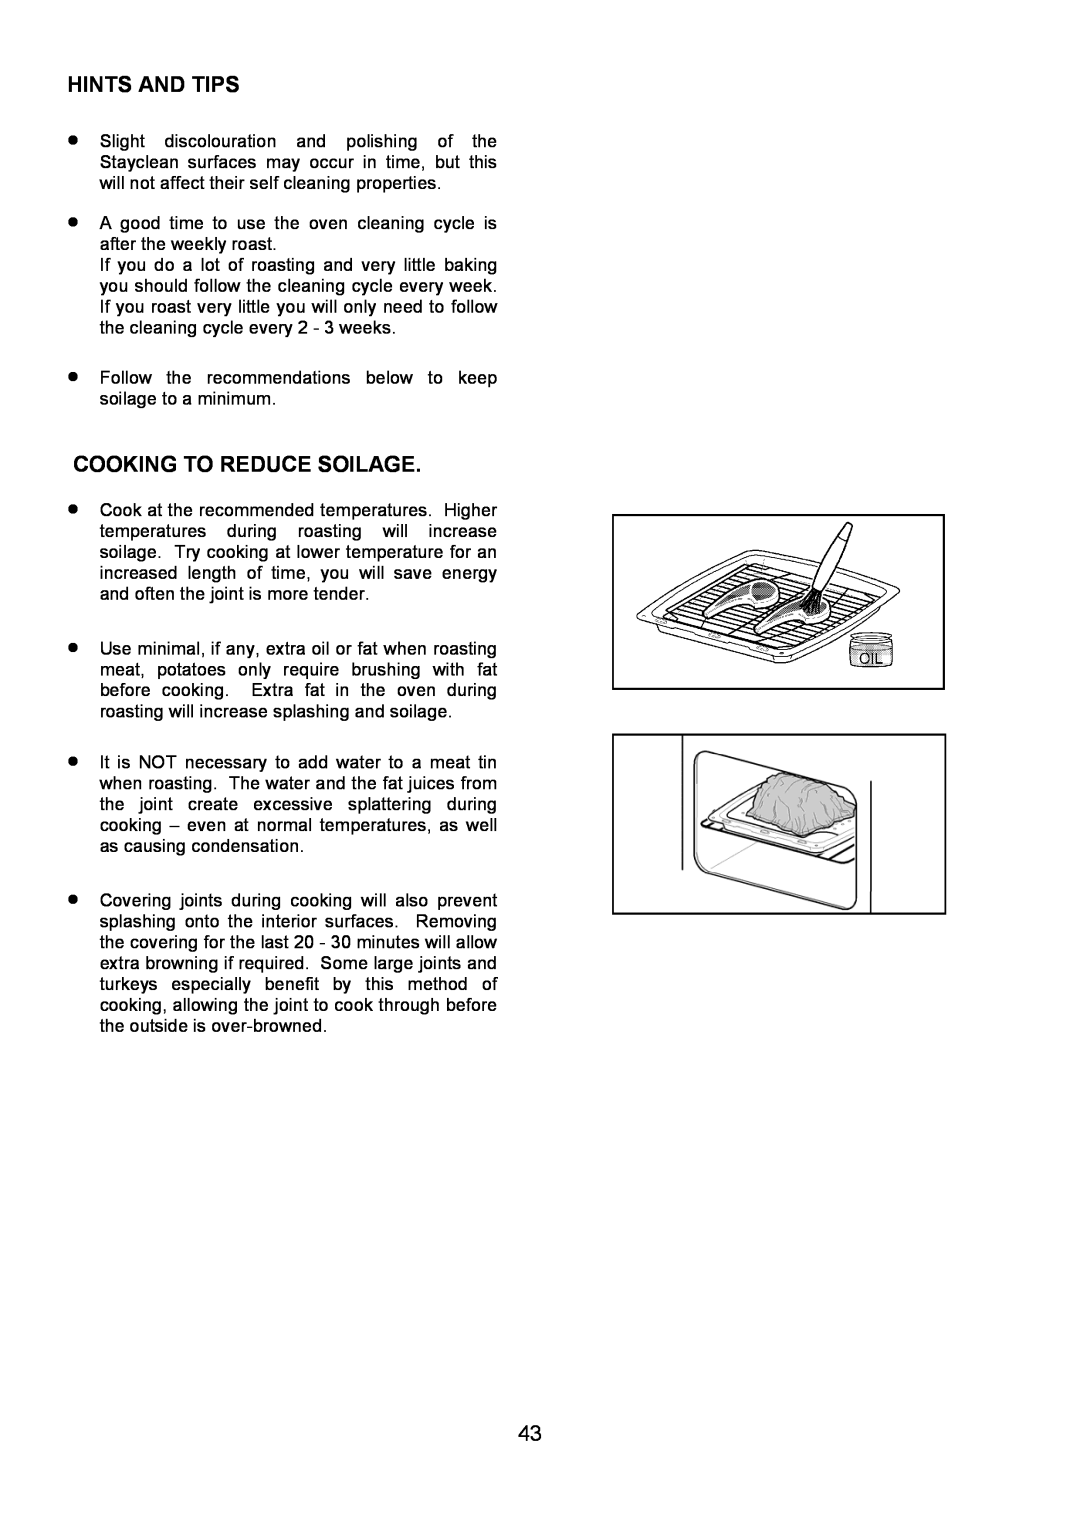 Zanussi 311608901 manual Cooking To Reduce Soilage, Hints And Tips 